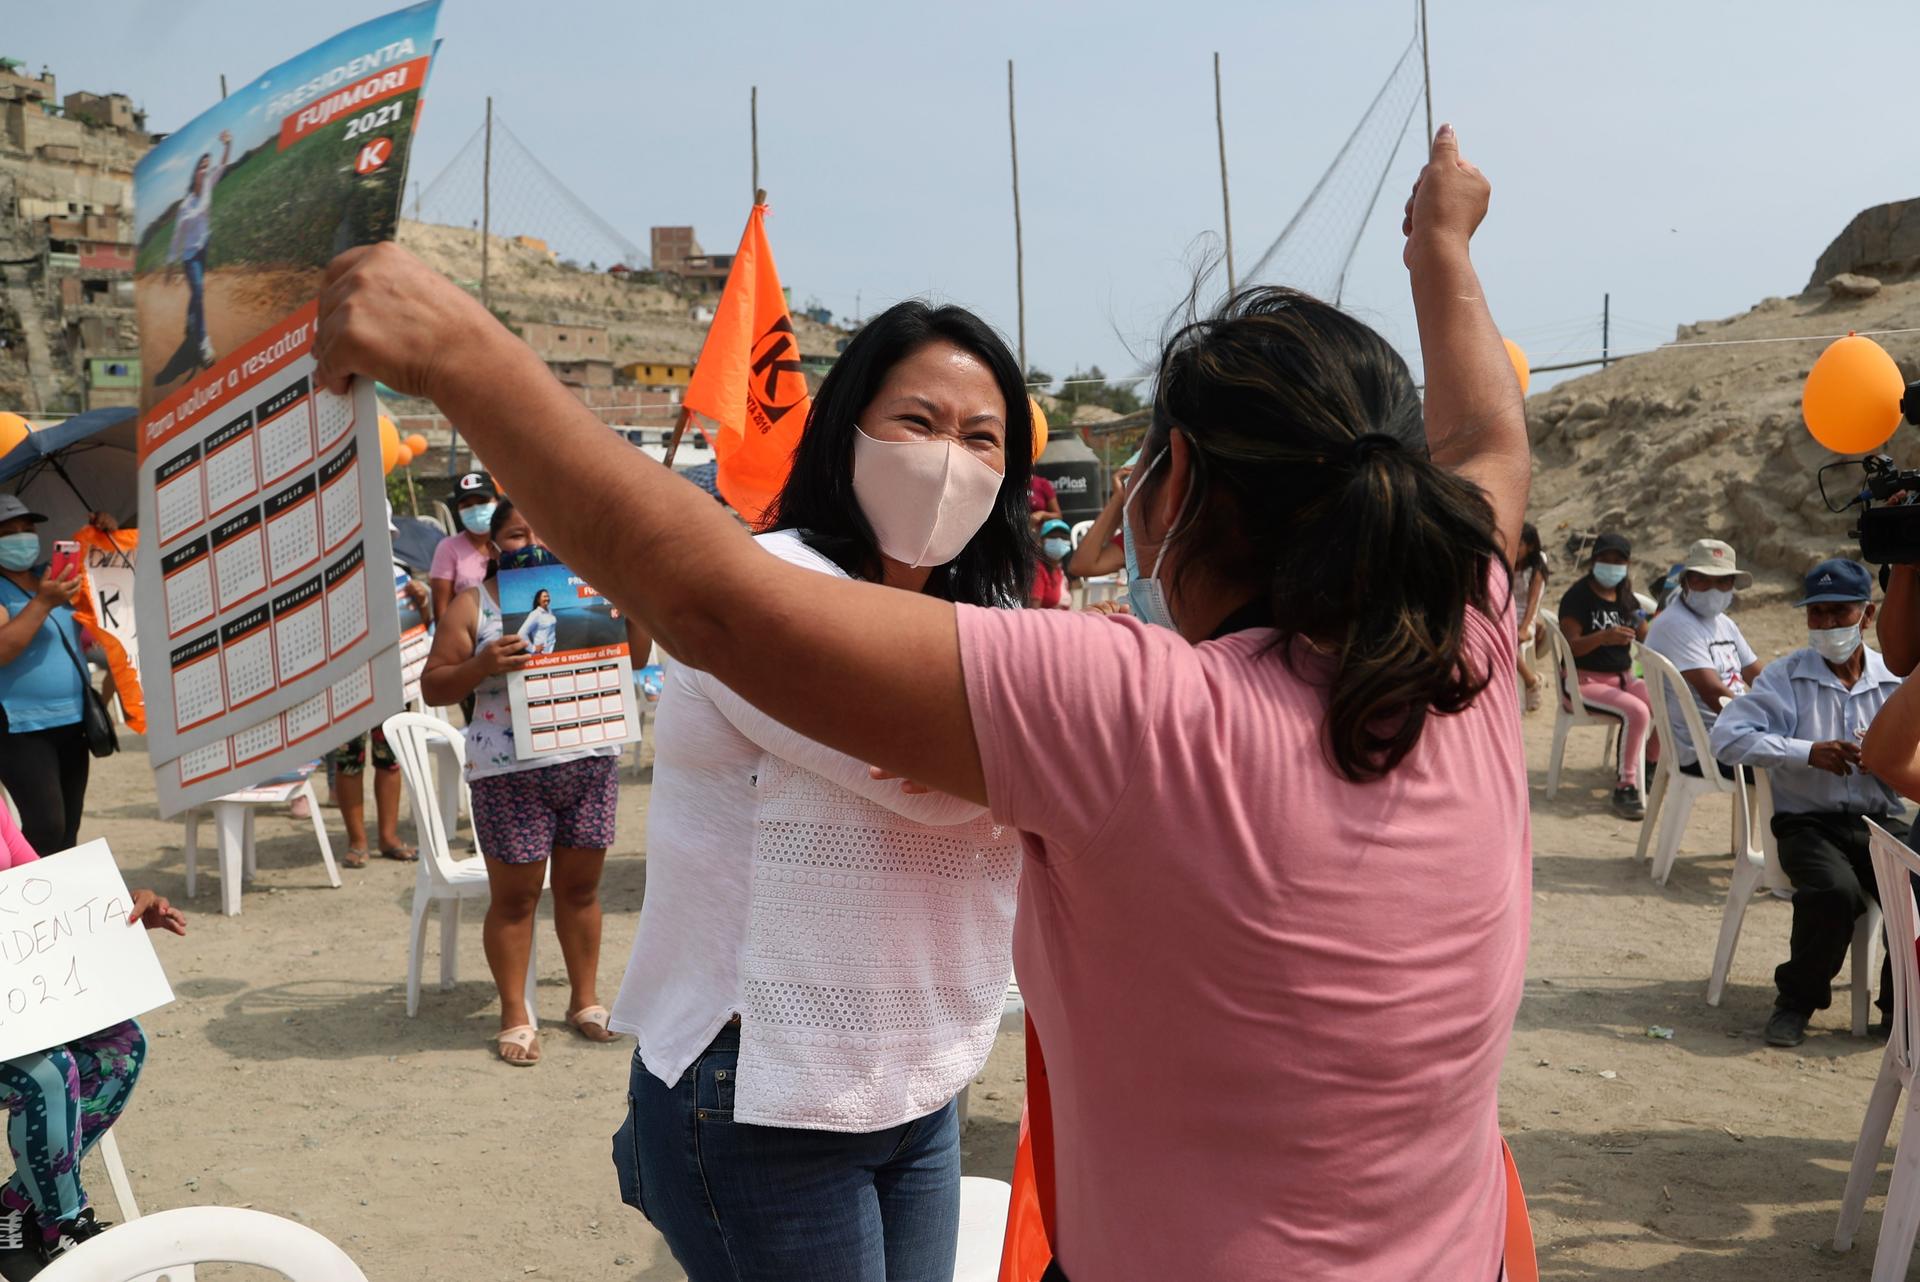 Wearing a mask to curb the spread of the new coronavirus, presidential candidate and daughter of imprisoned ex-President Alberto Fujimori, Keiko Fujimori, of the Popular Force party, greets a supporter as she campaigns in San Juan de Lurigancho on the out